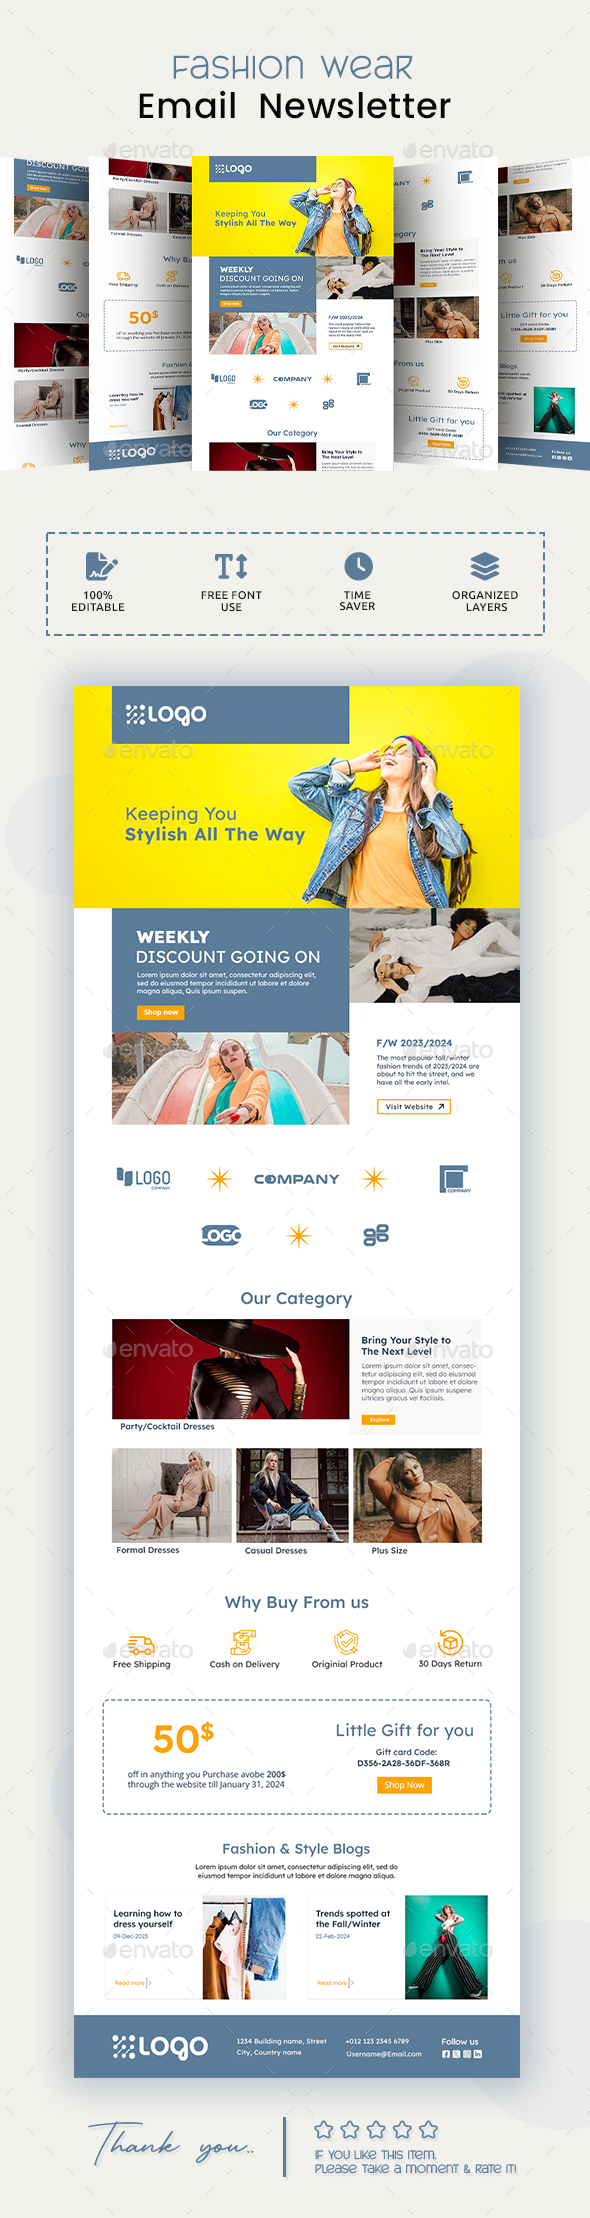 Fashion Wear Email Newsletter PSD Template